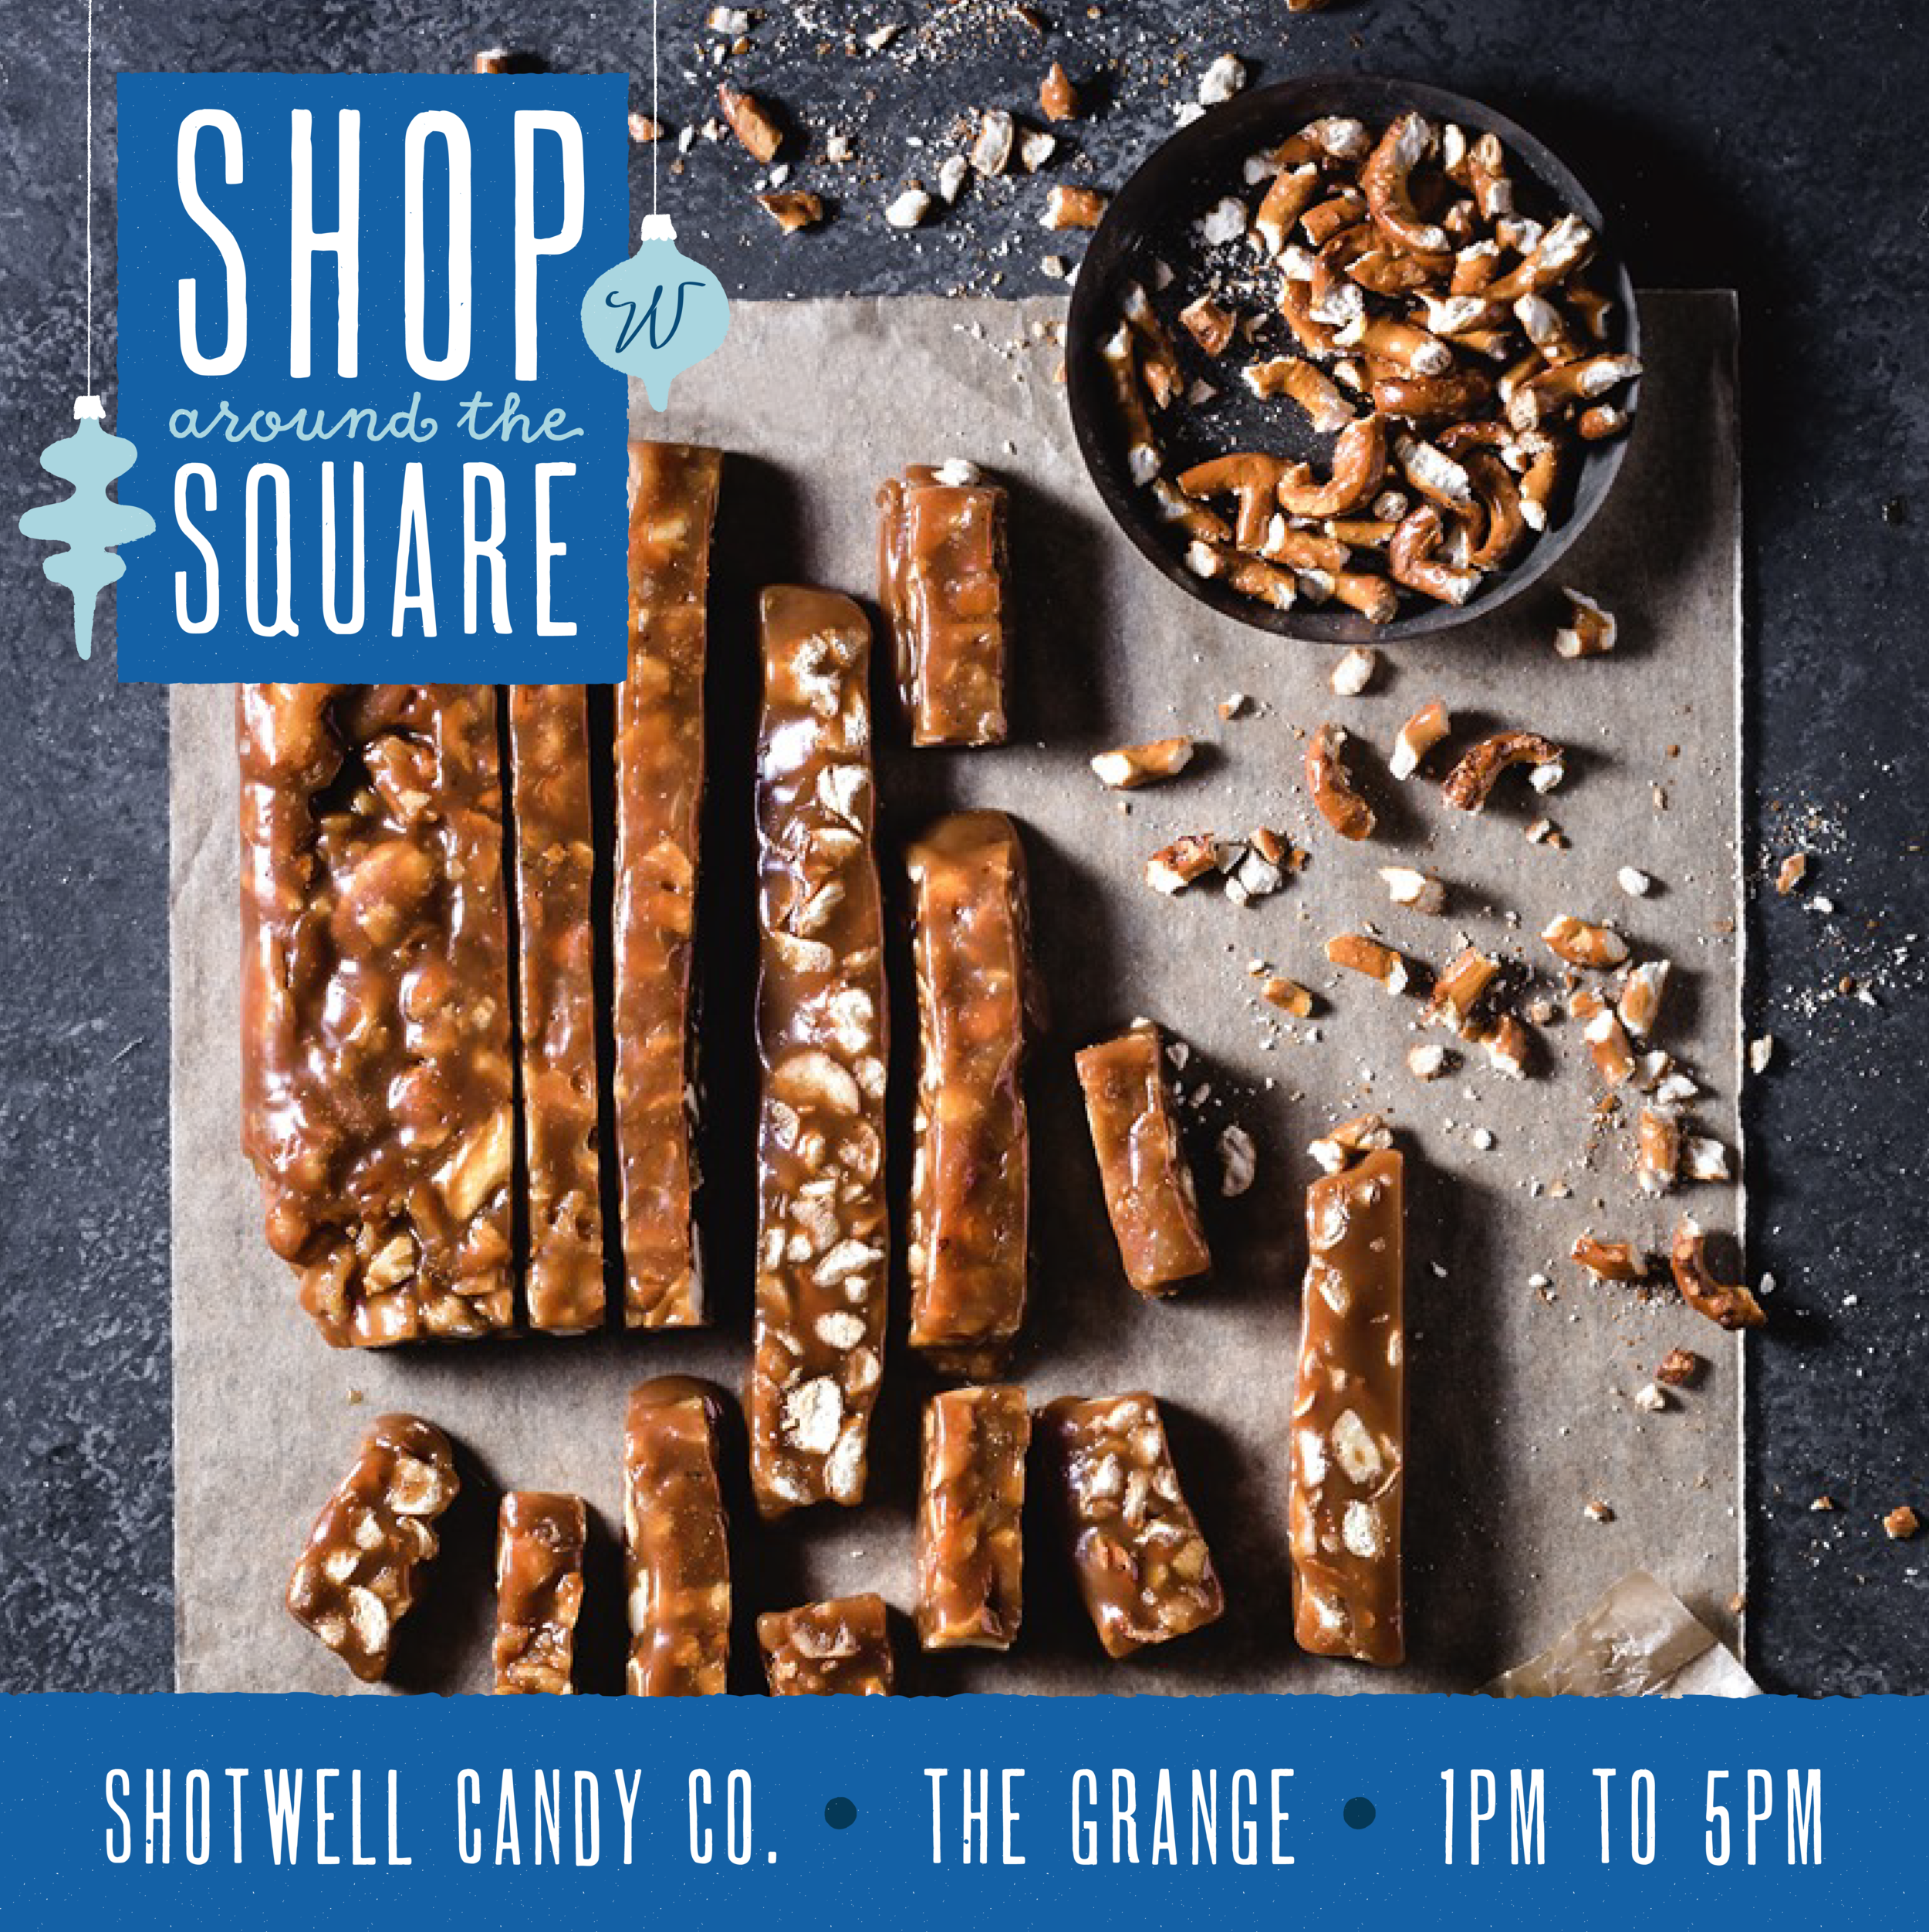 Shop_around_the_square-Shotwell_candy-19.png